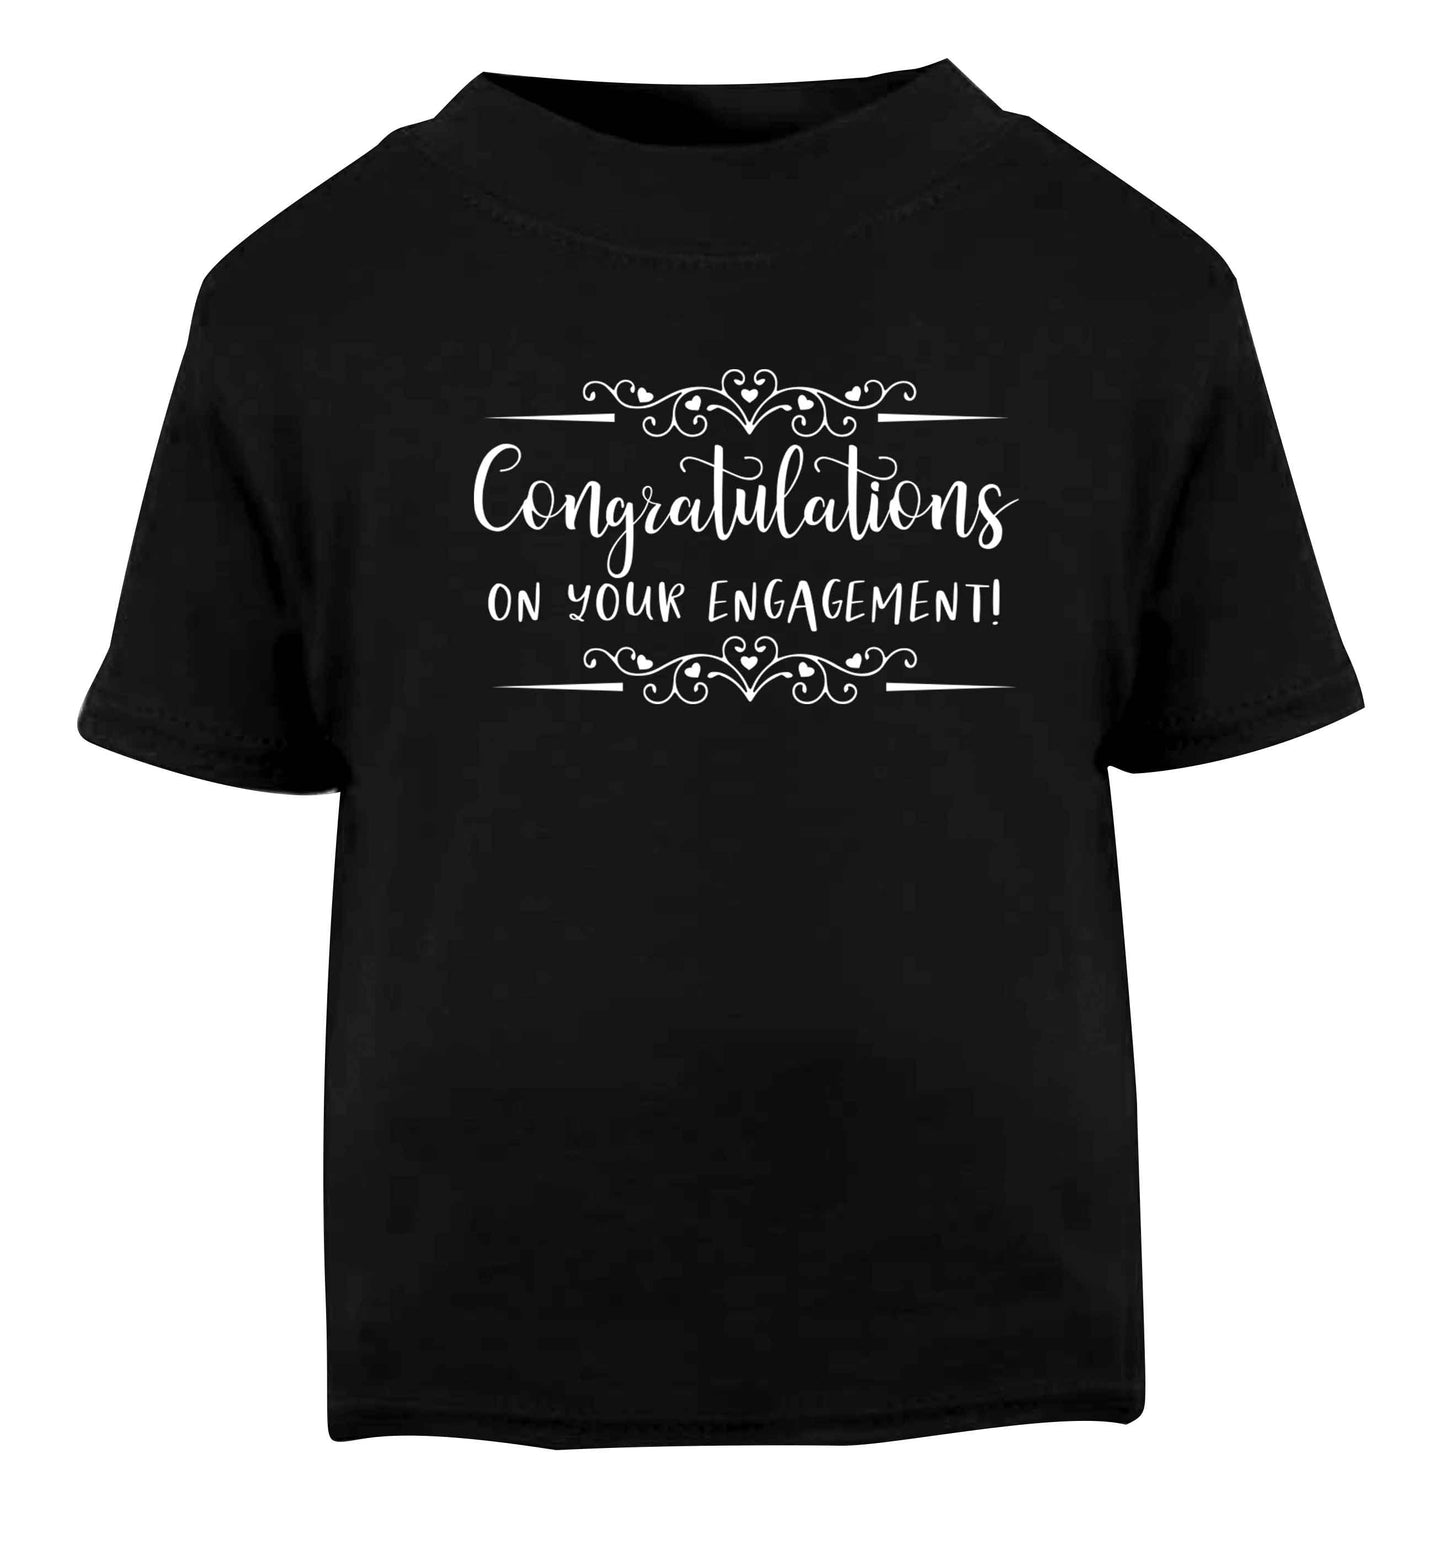 Congratulations on your engagement Black baby toddler Tshirt 2 years